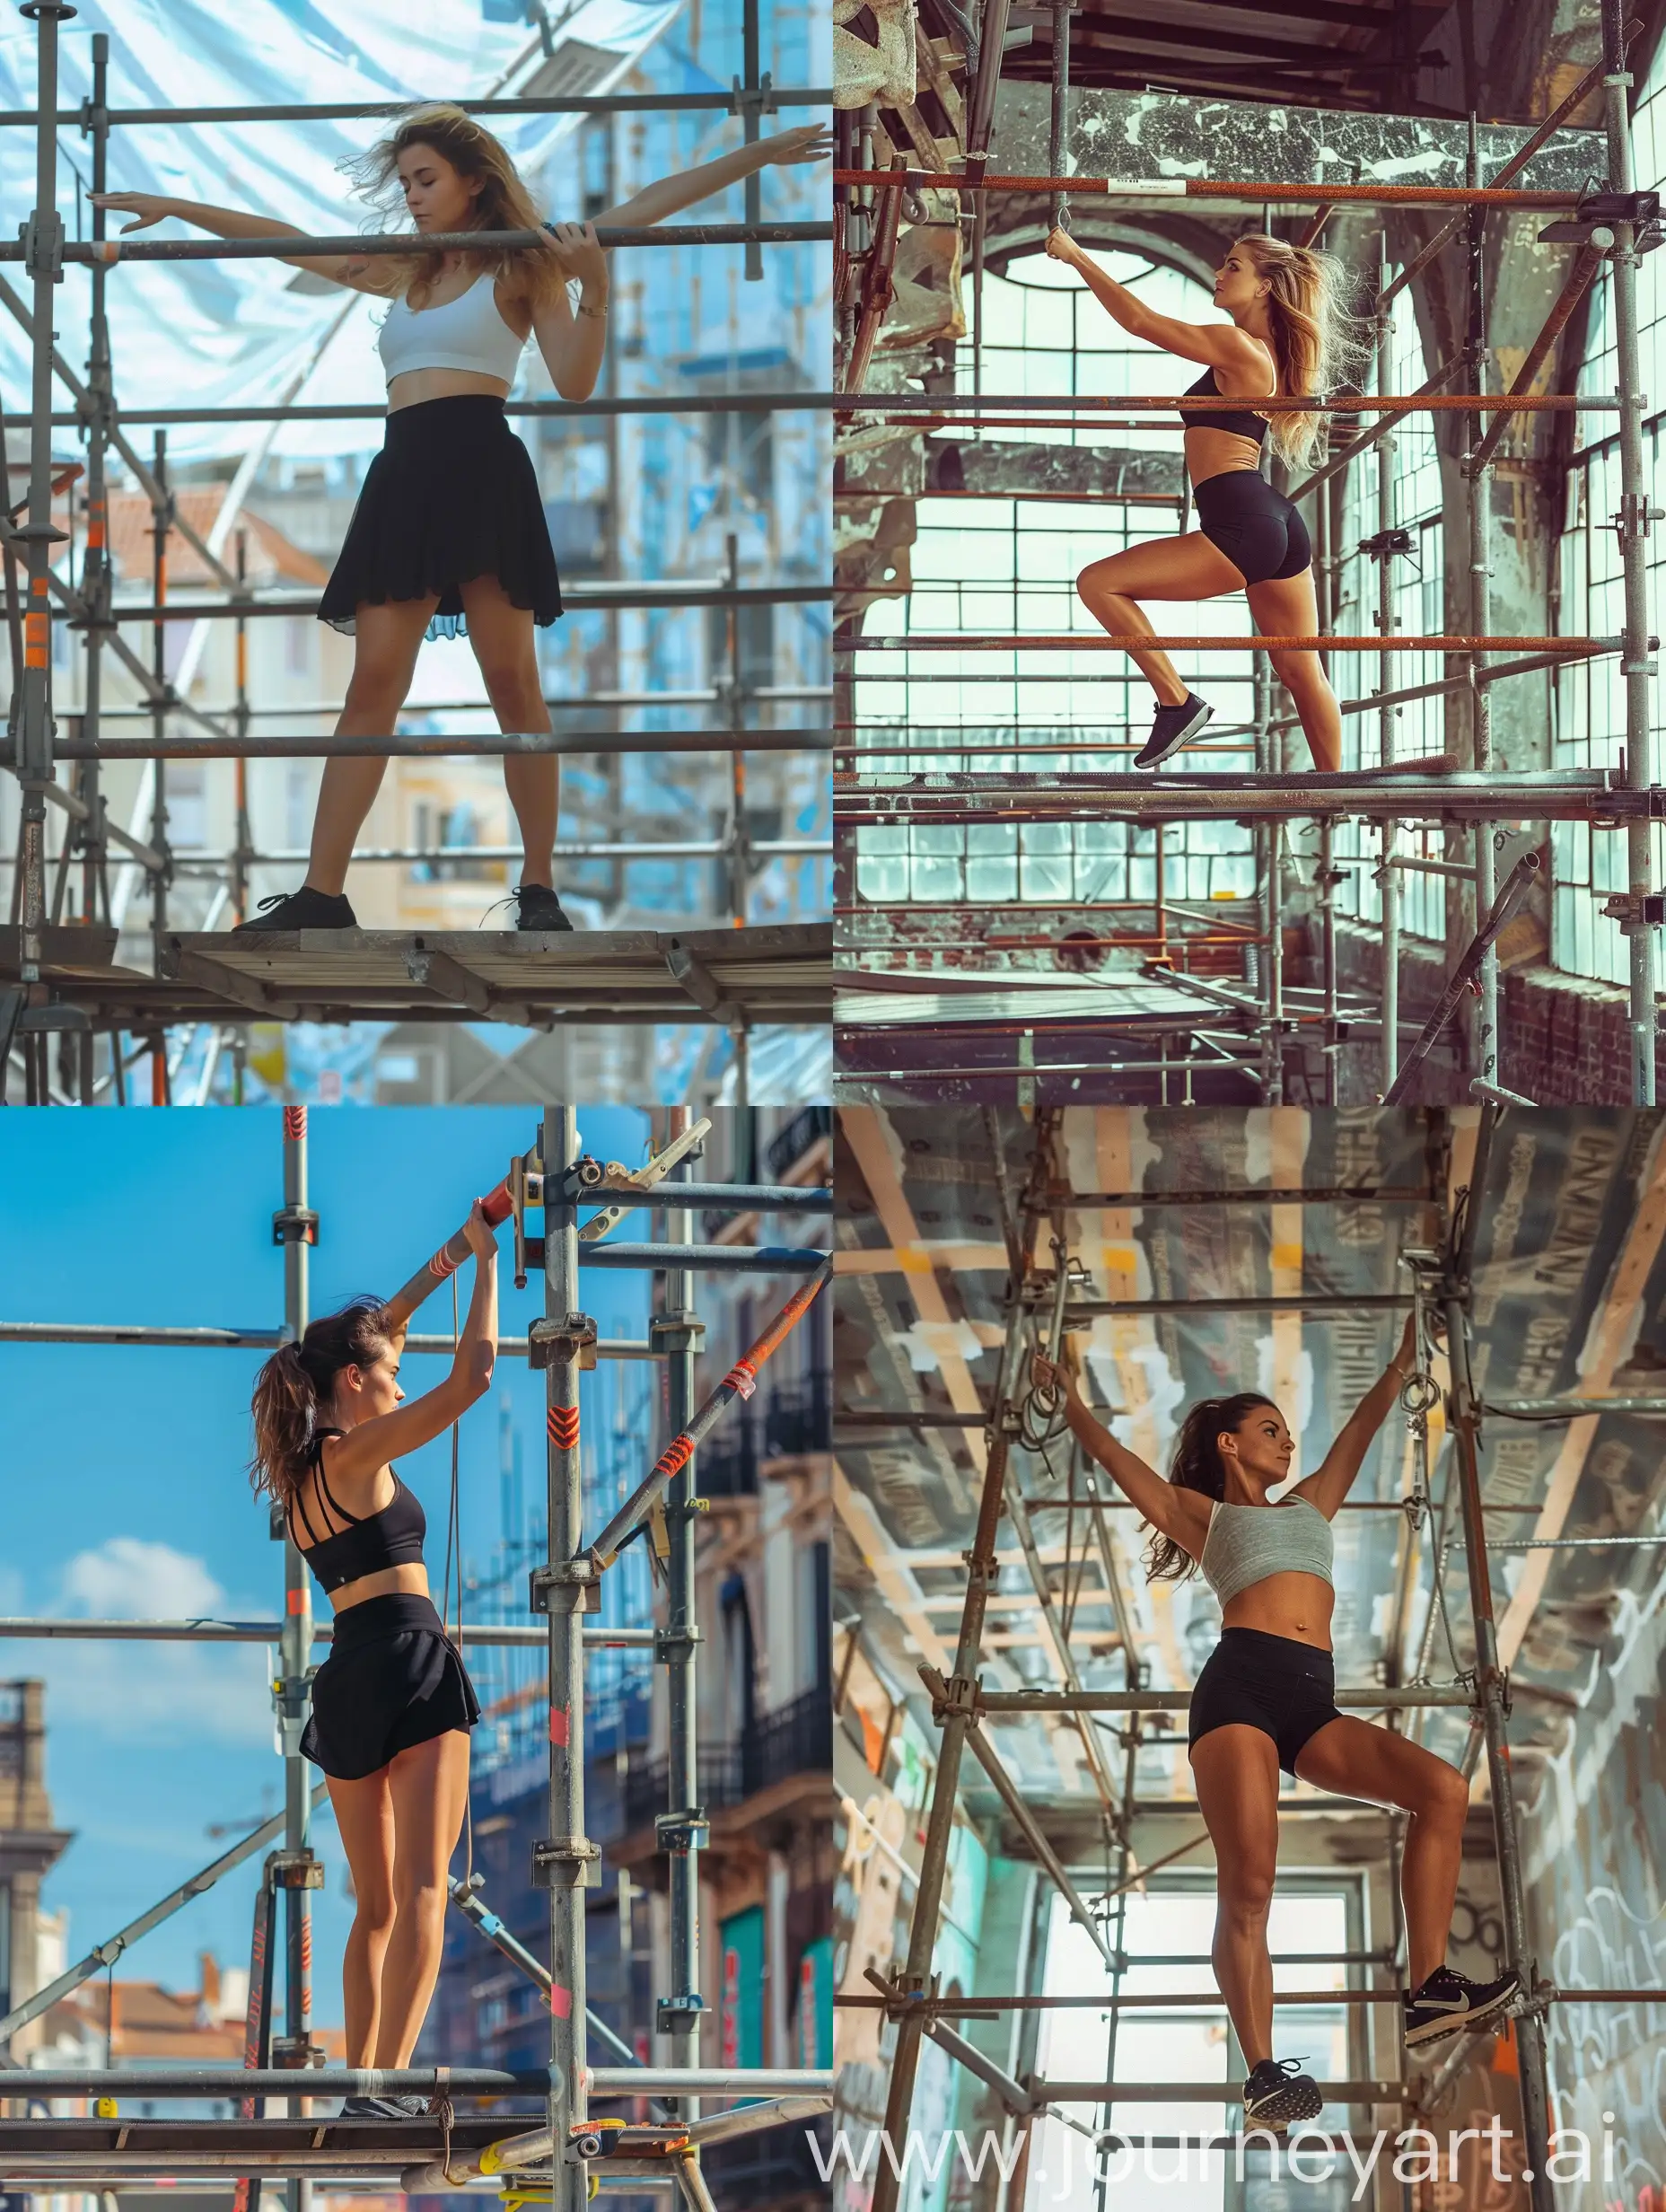 A beautiful woman, black skirt, fitness, is working on a steel scaffold under construction